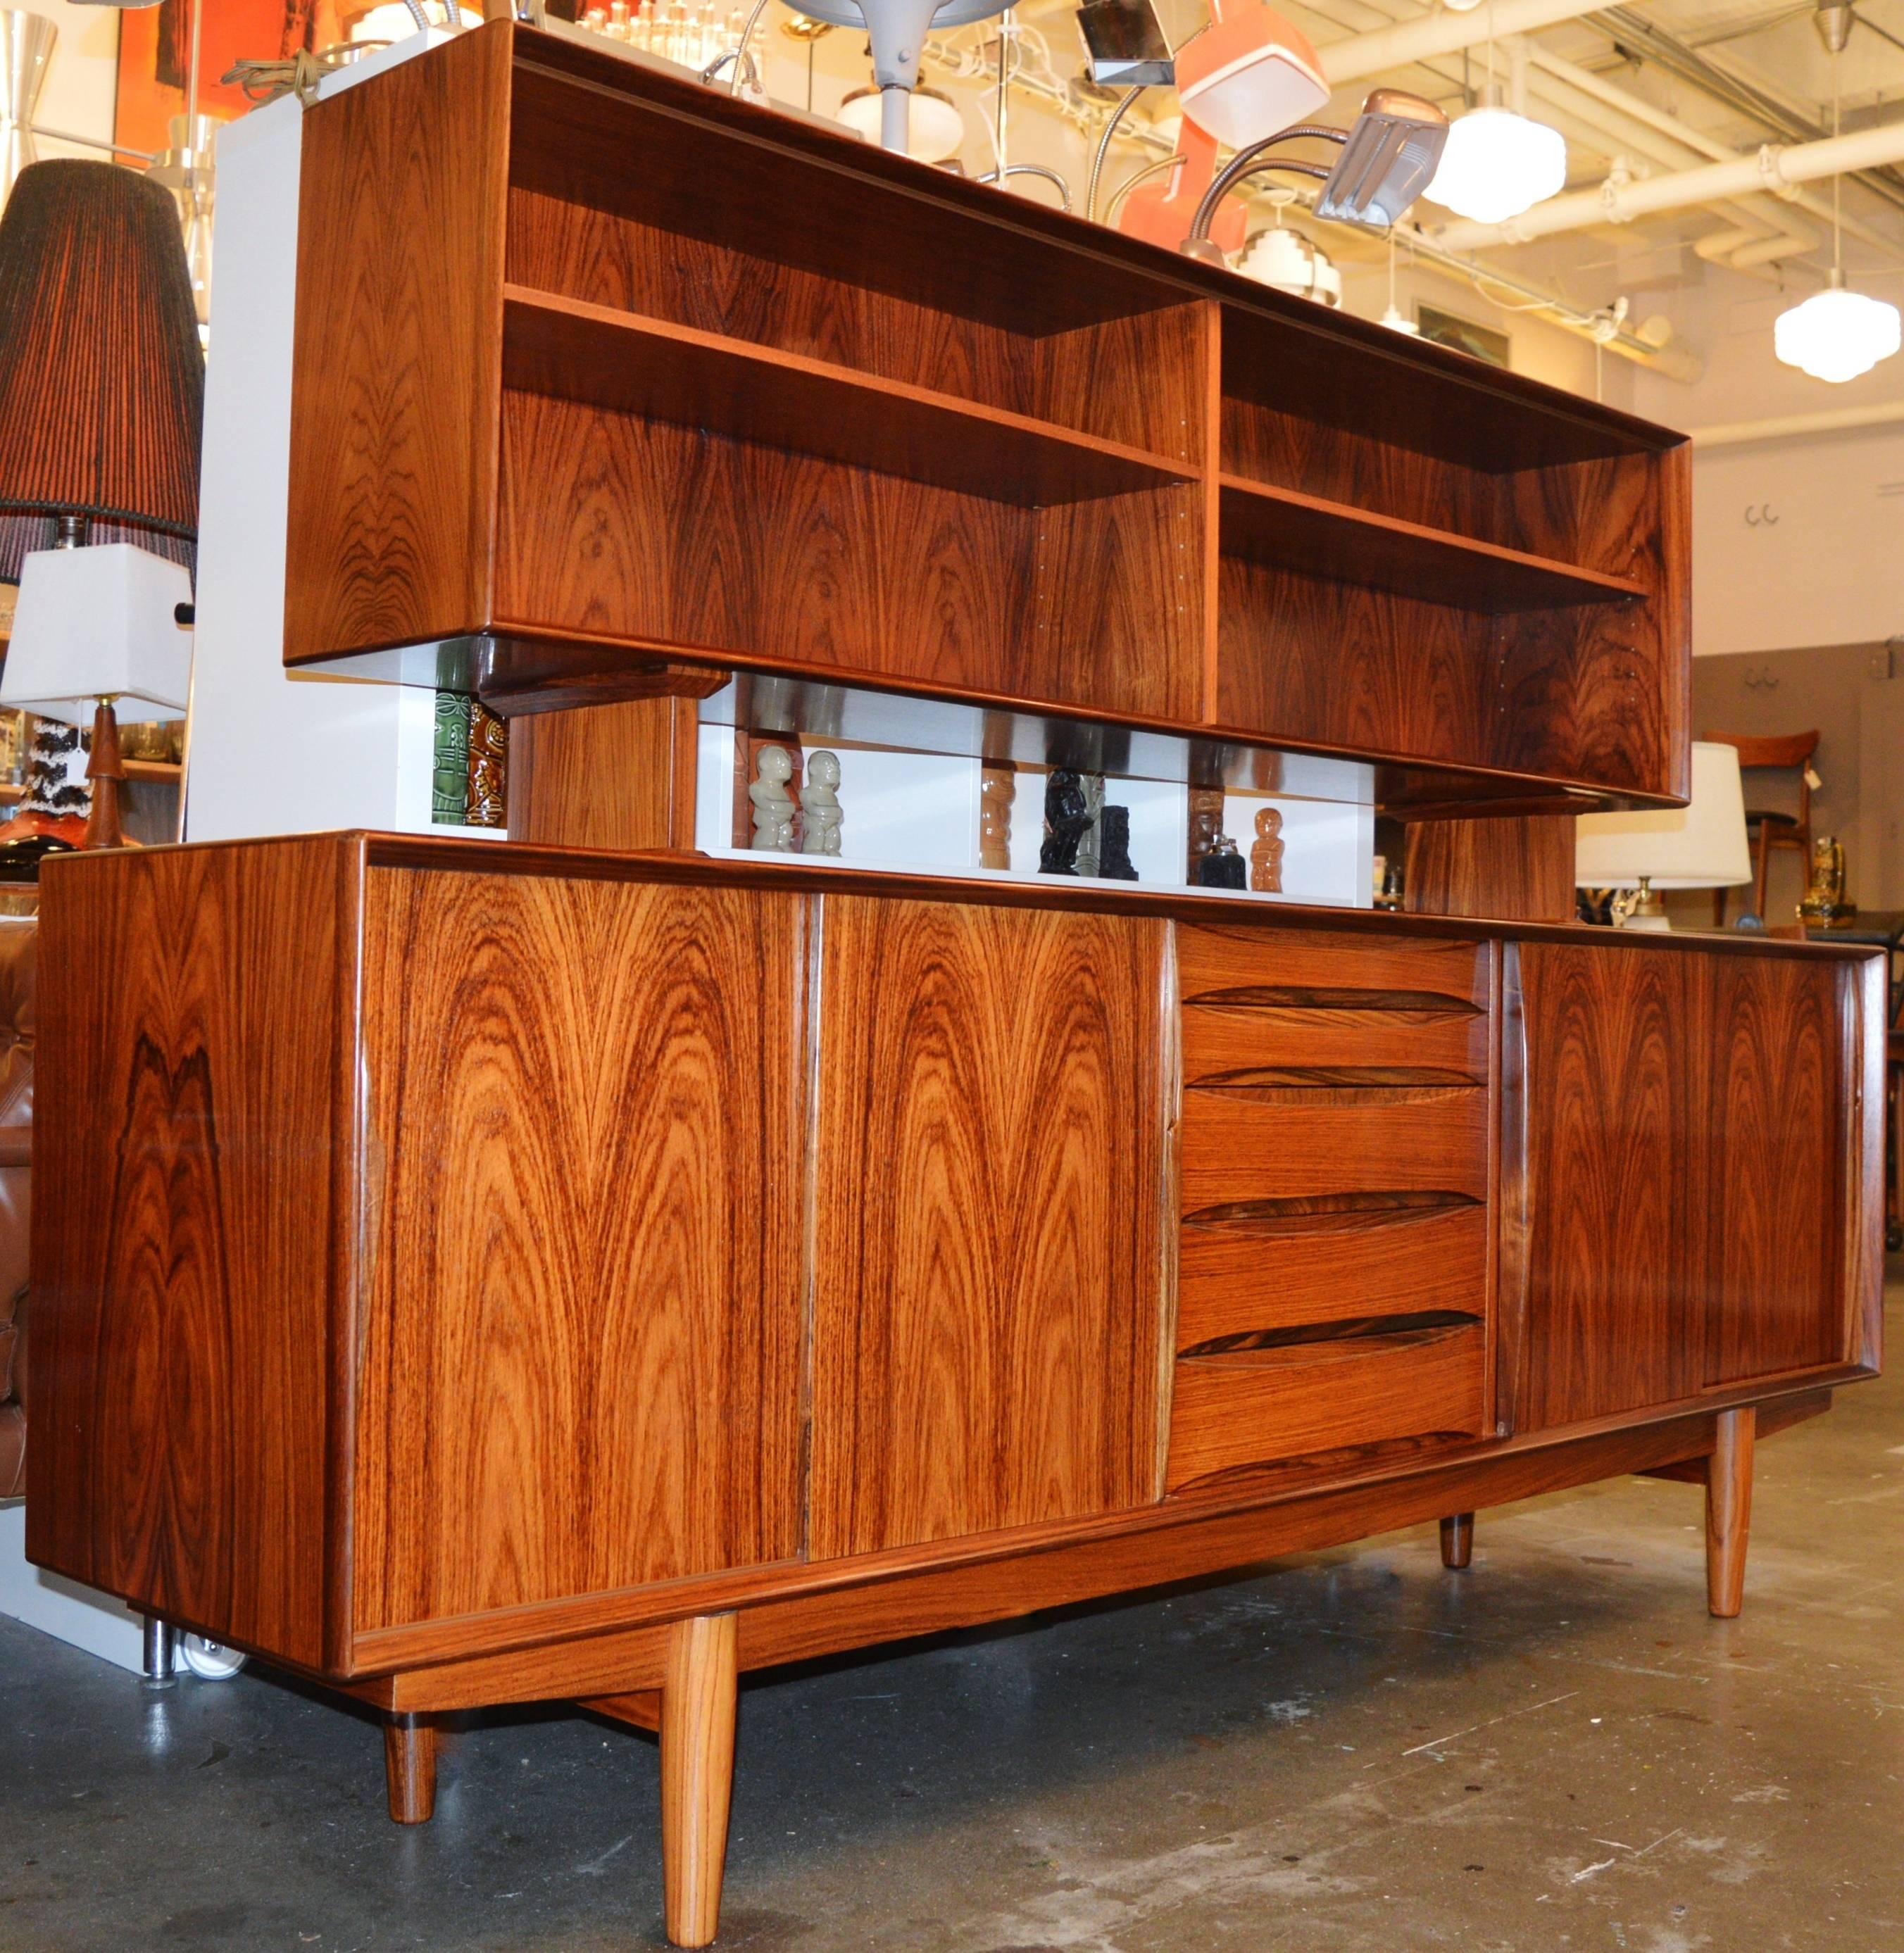 This absolutely stunning Danish modern rosewood buffet and hutch were made by Skovby Mobelfabrik in the style of Arne Vodder and are in excellent original condition. The lower buffet/credenza features four sliding doors with bookmatched grain and